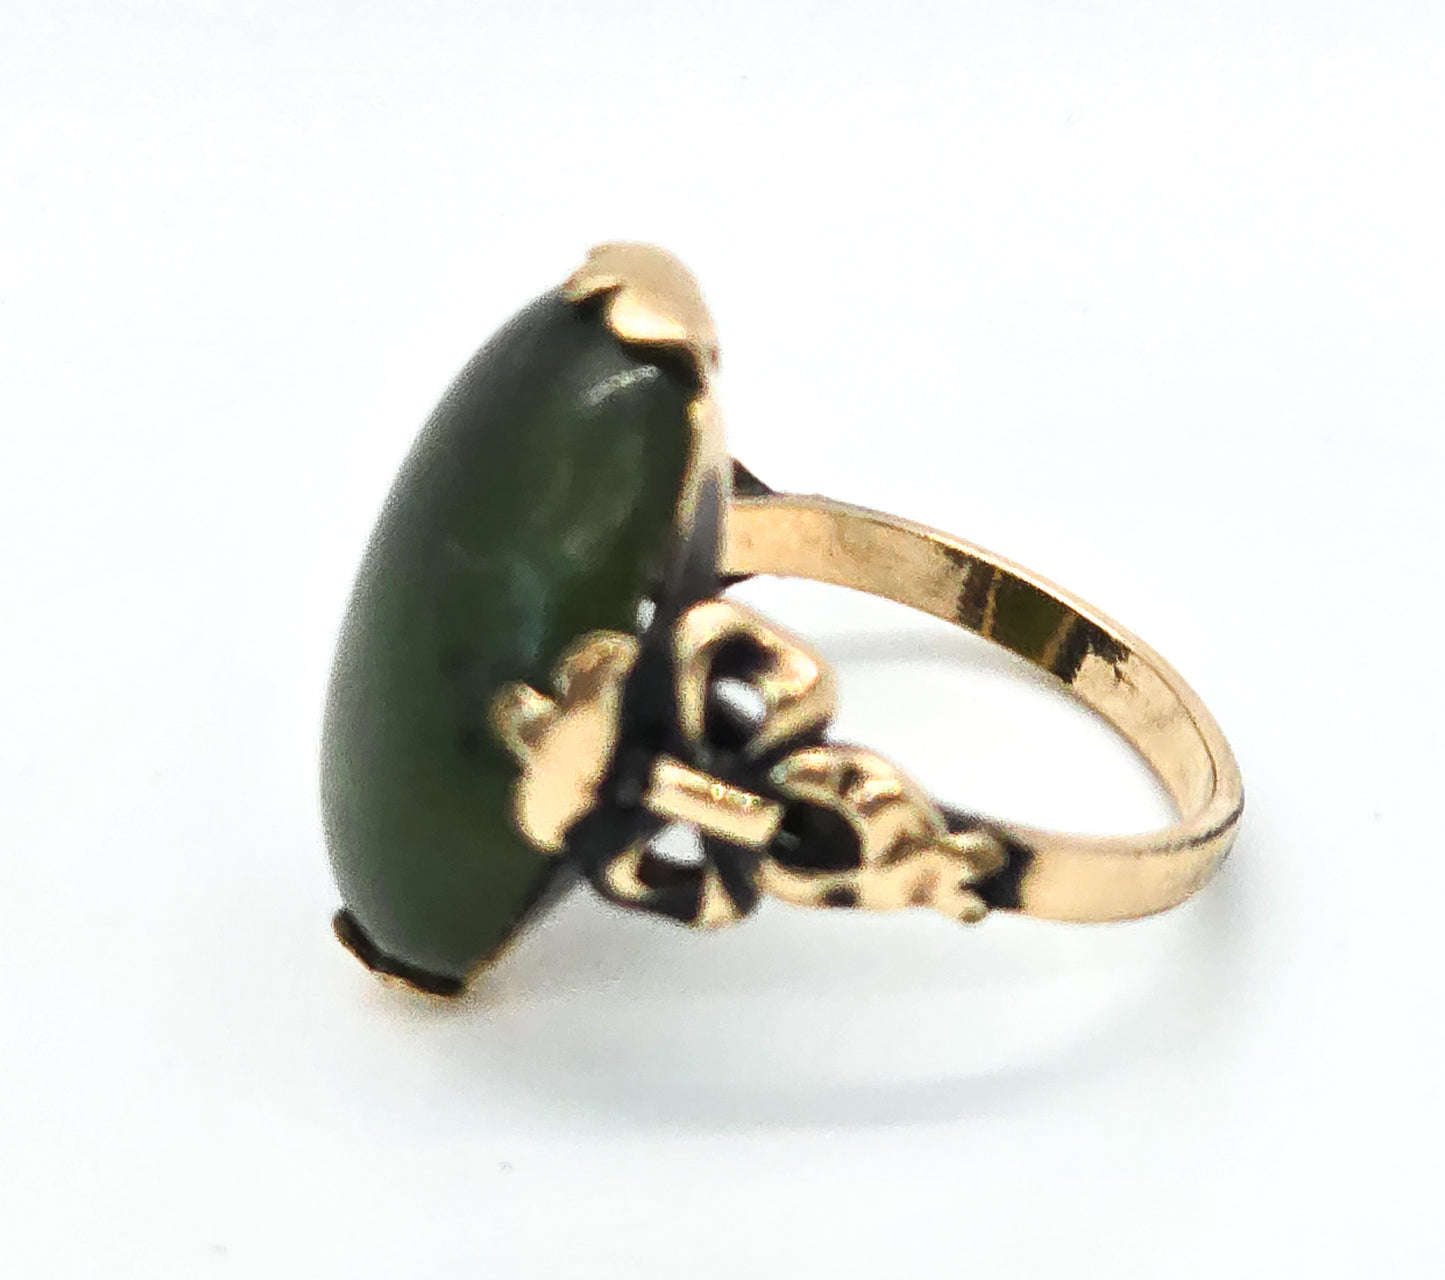 Jade Clark and Coombs antique 10k gold filled Art Deco Bow ring size 5.5